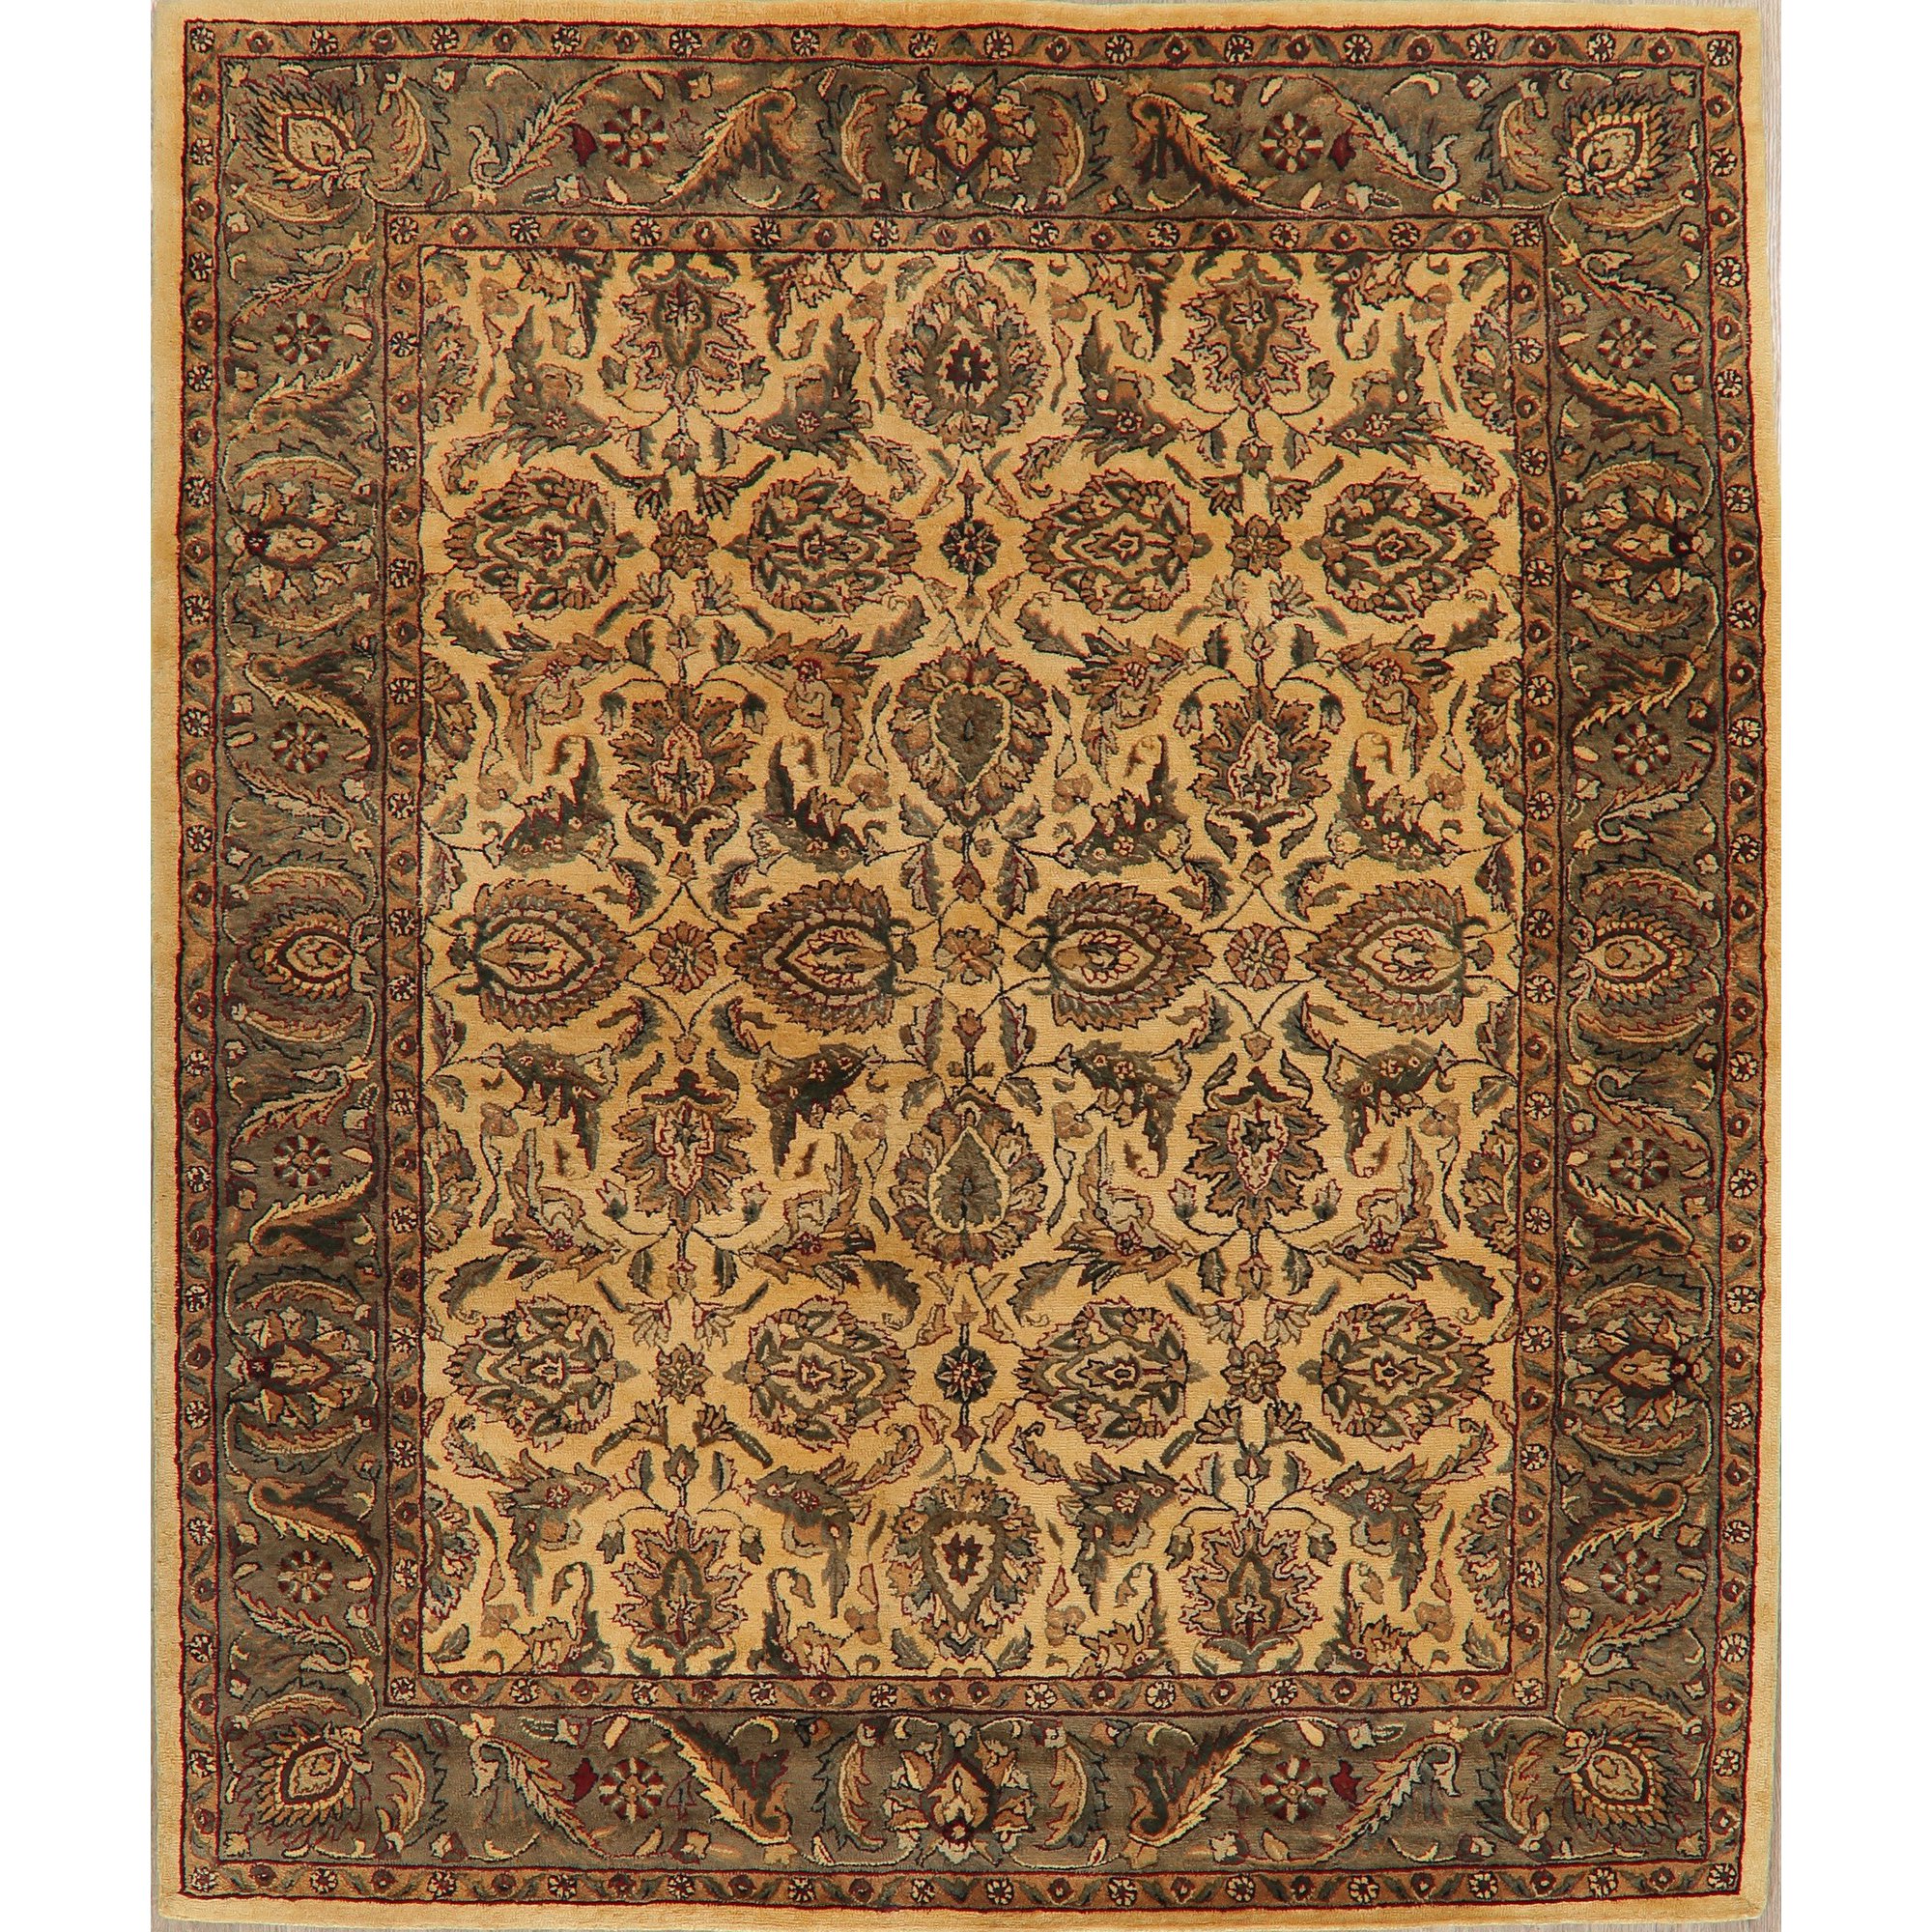 Floral Agra Oriental Wool Hand Tufted Area Rug For Living Room 8x10 Walmart Canada